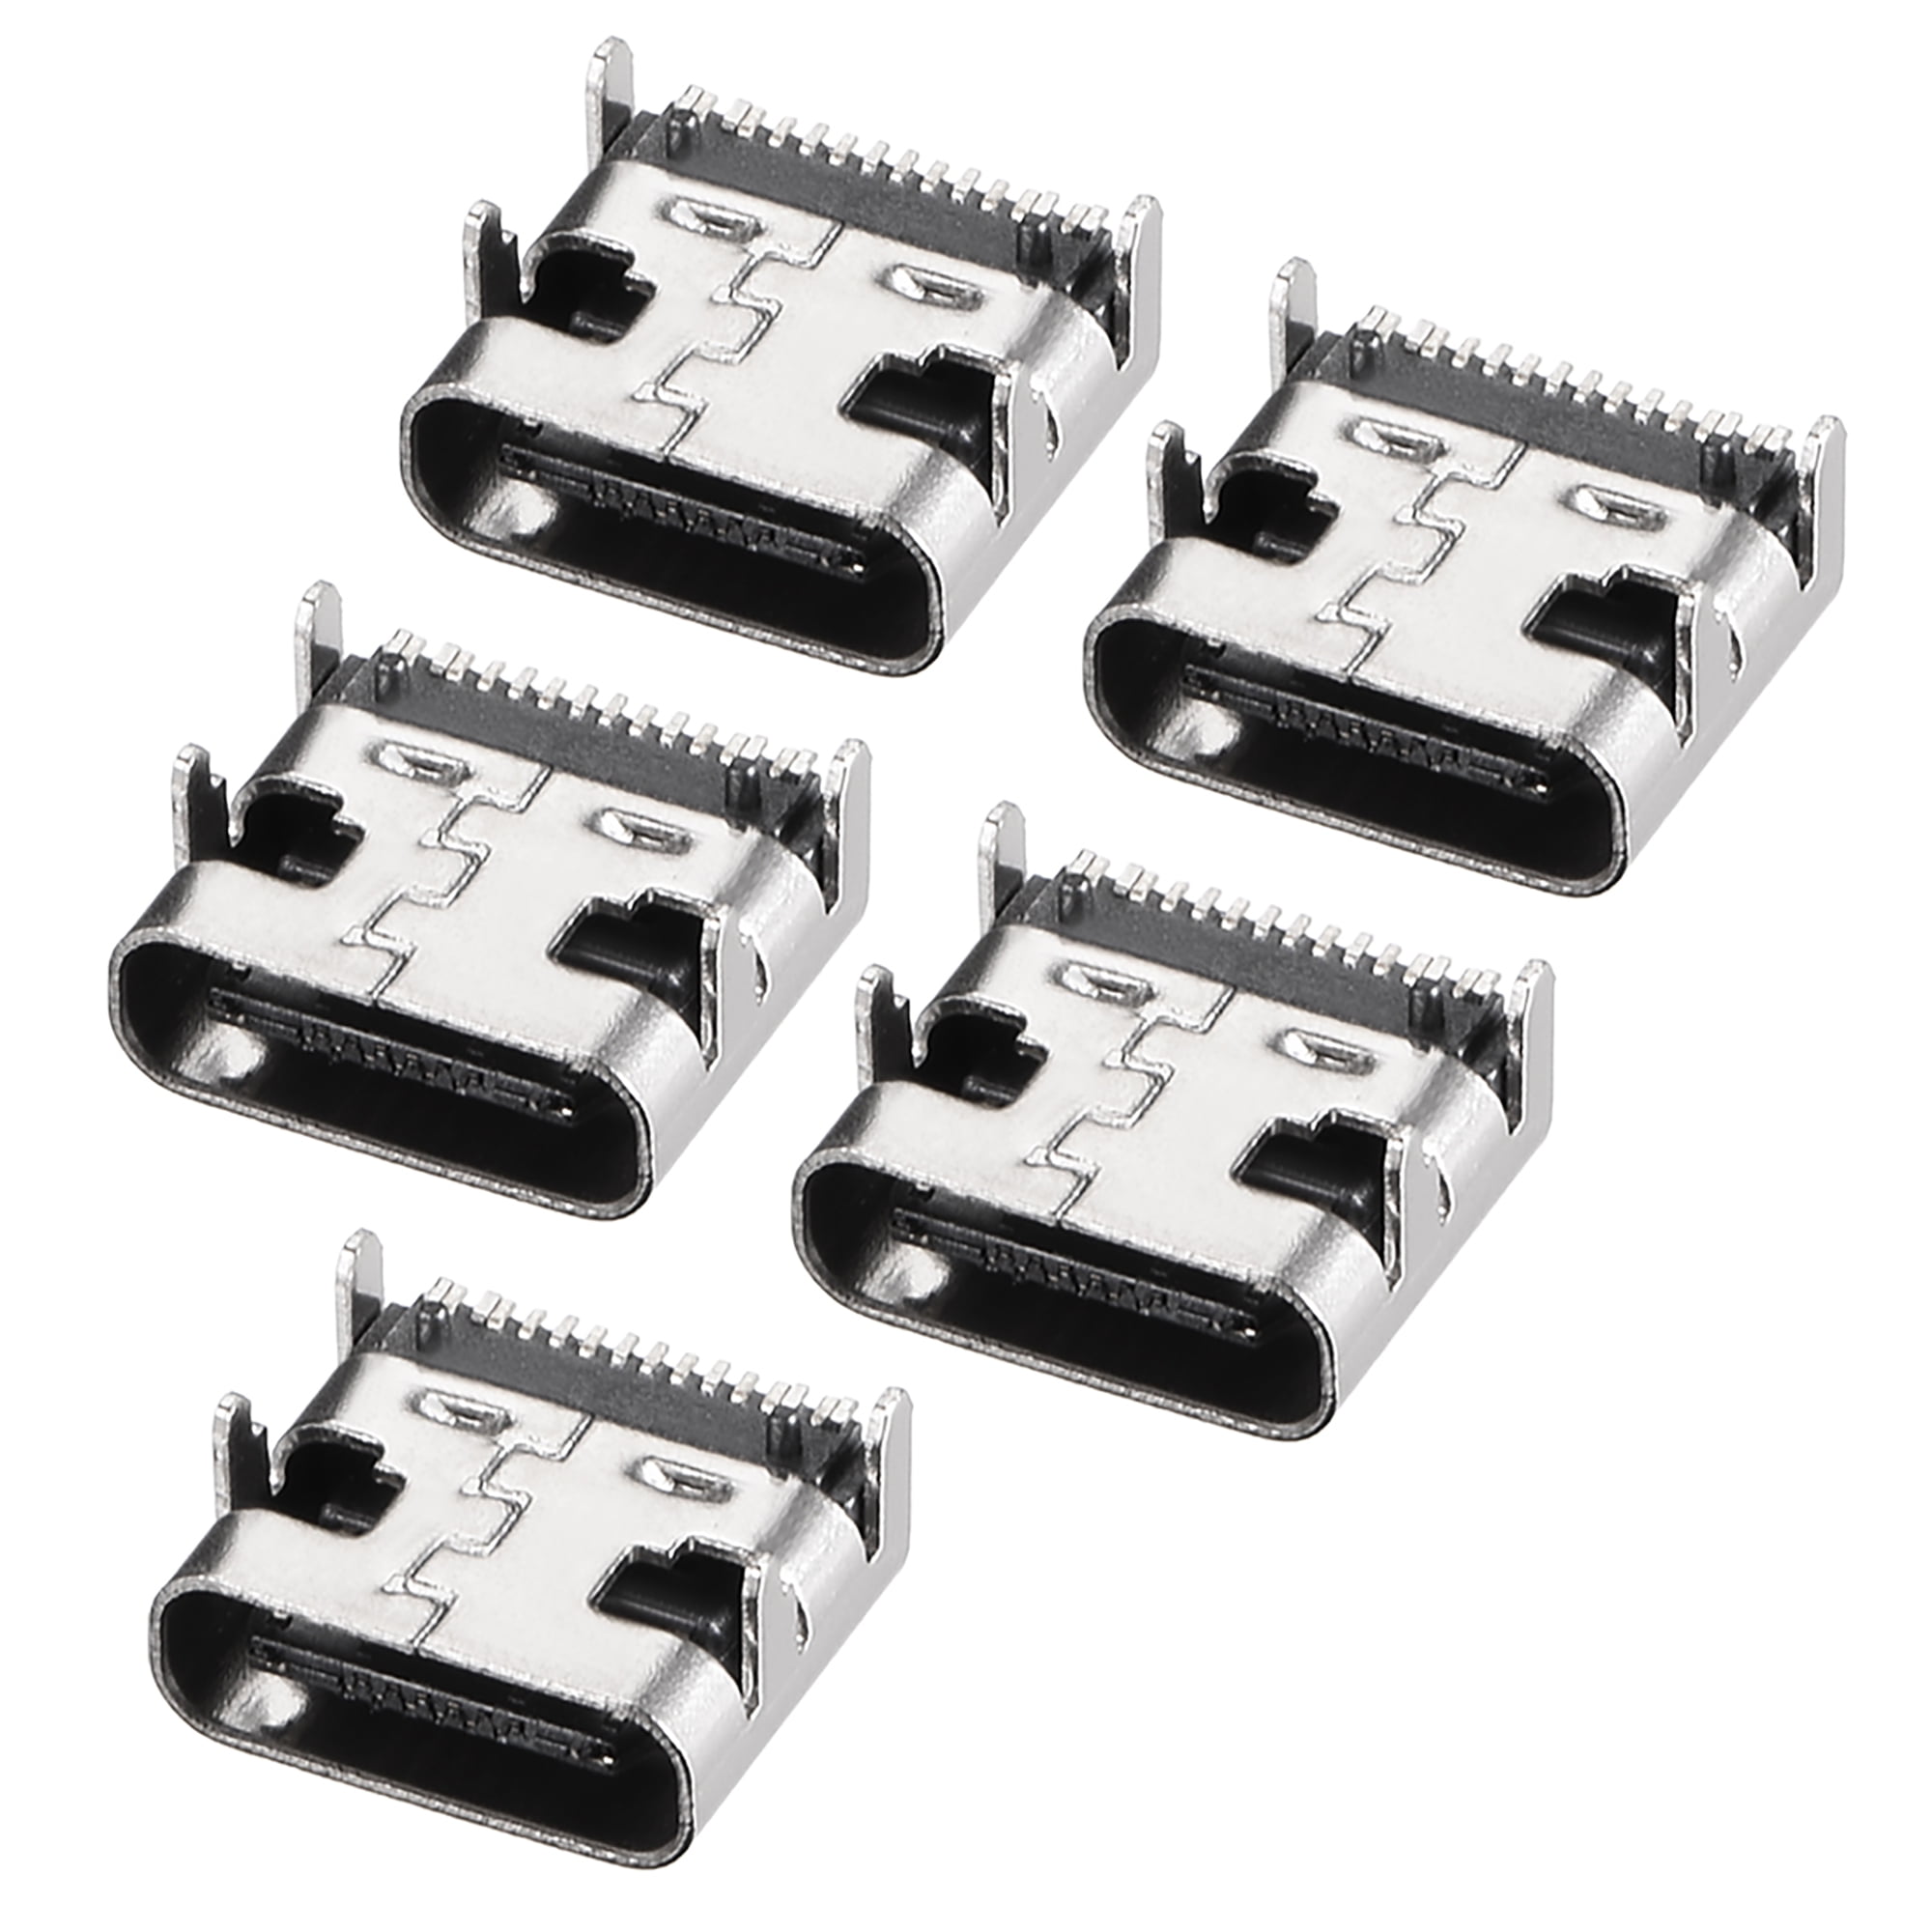 Keszoox 5 Sets 5.08mm Pitch Male & Female No Soldering Green Phoenix Type Connector 3 Pin PCB Screw Terminal Block 